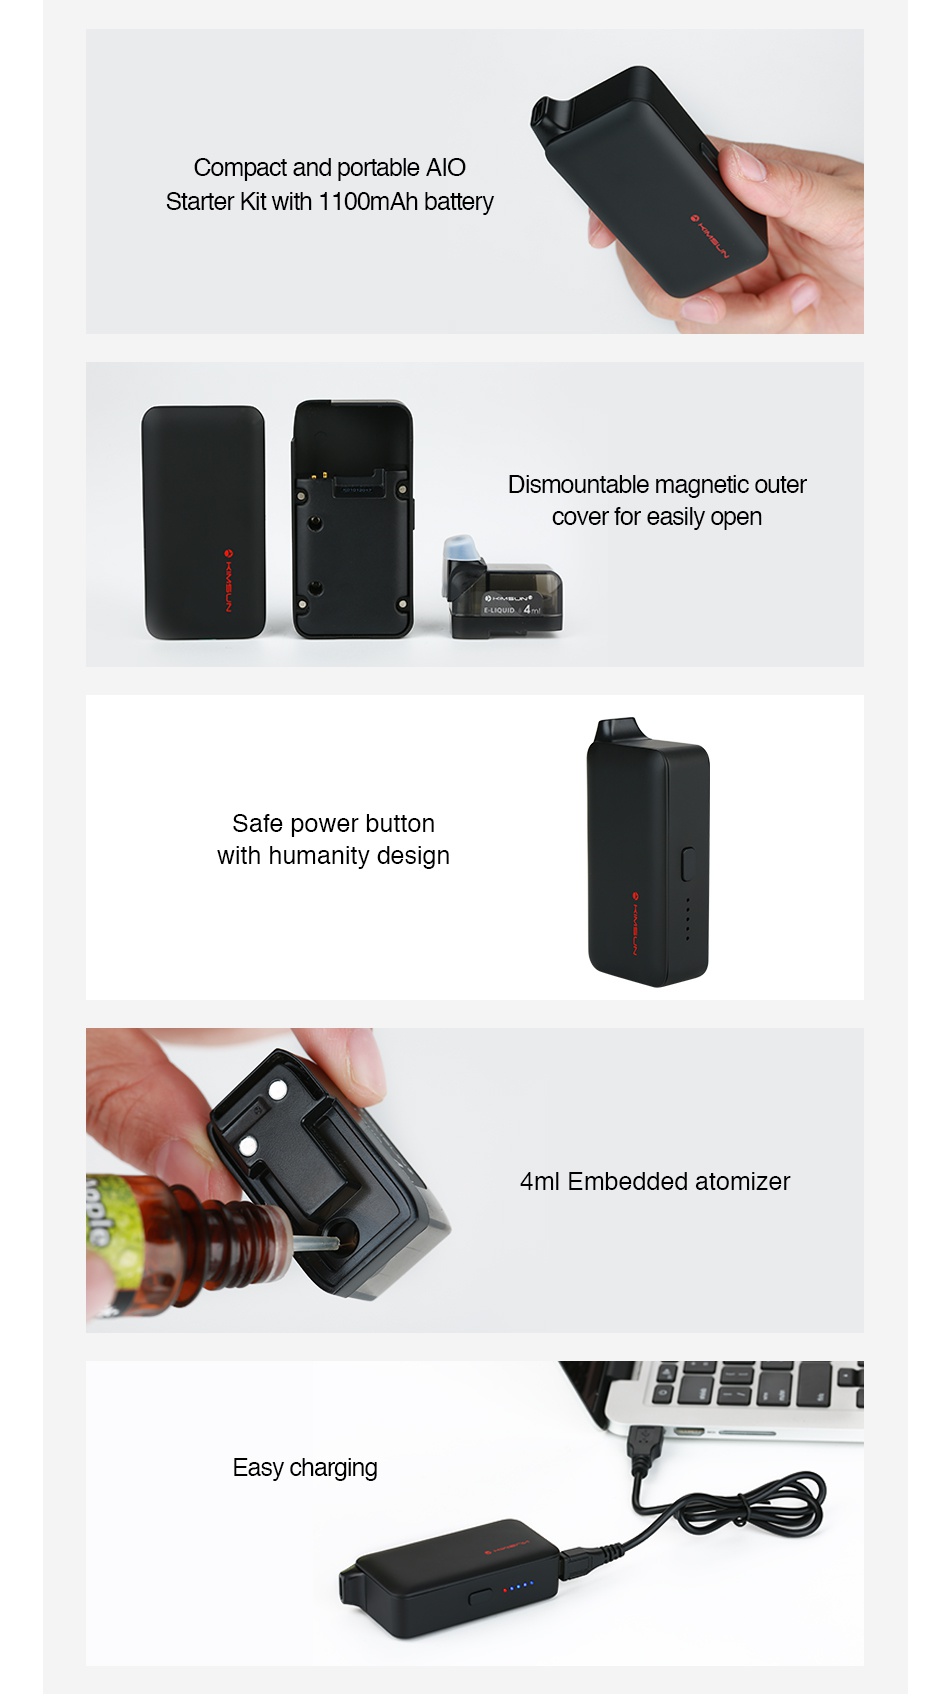 KIMSUN Cube 4R AIO Starter Kit 1100mAh Compact and portable Alo Starter Kit with 1100 battery Dismountable magnetic outer cover for easily open Safe power button with humanity design 4m Embedded atomizer Easy charging